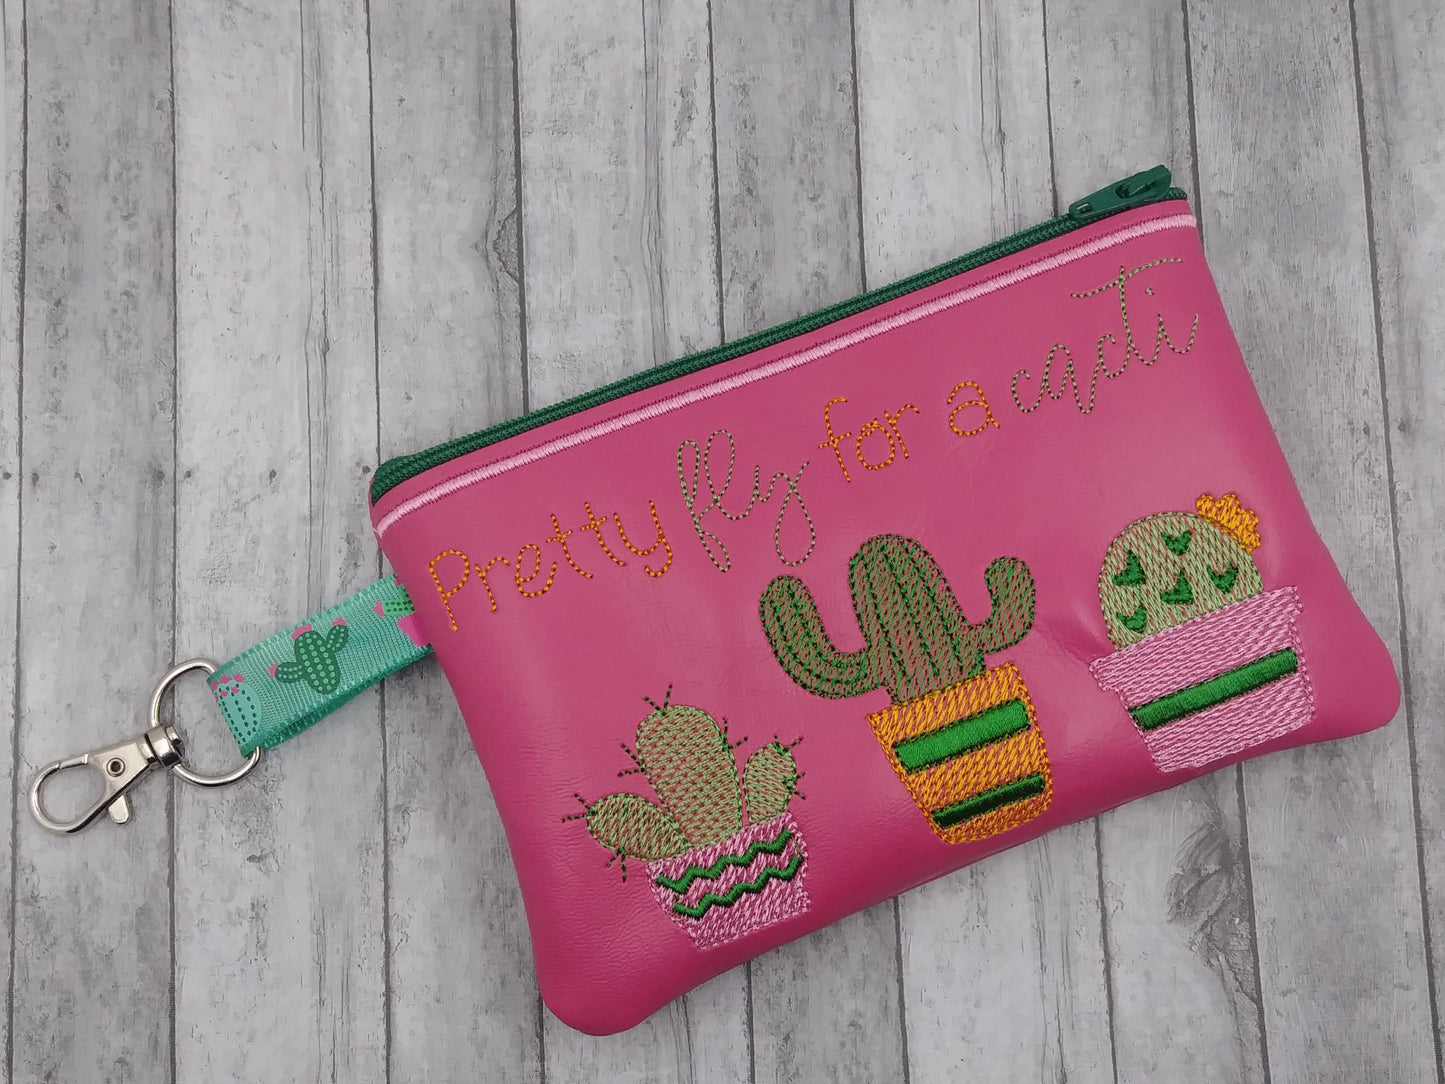 Pretty Fly For a Cacti Zipper Bag - 2 sizes - Digital Embroidery Design